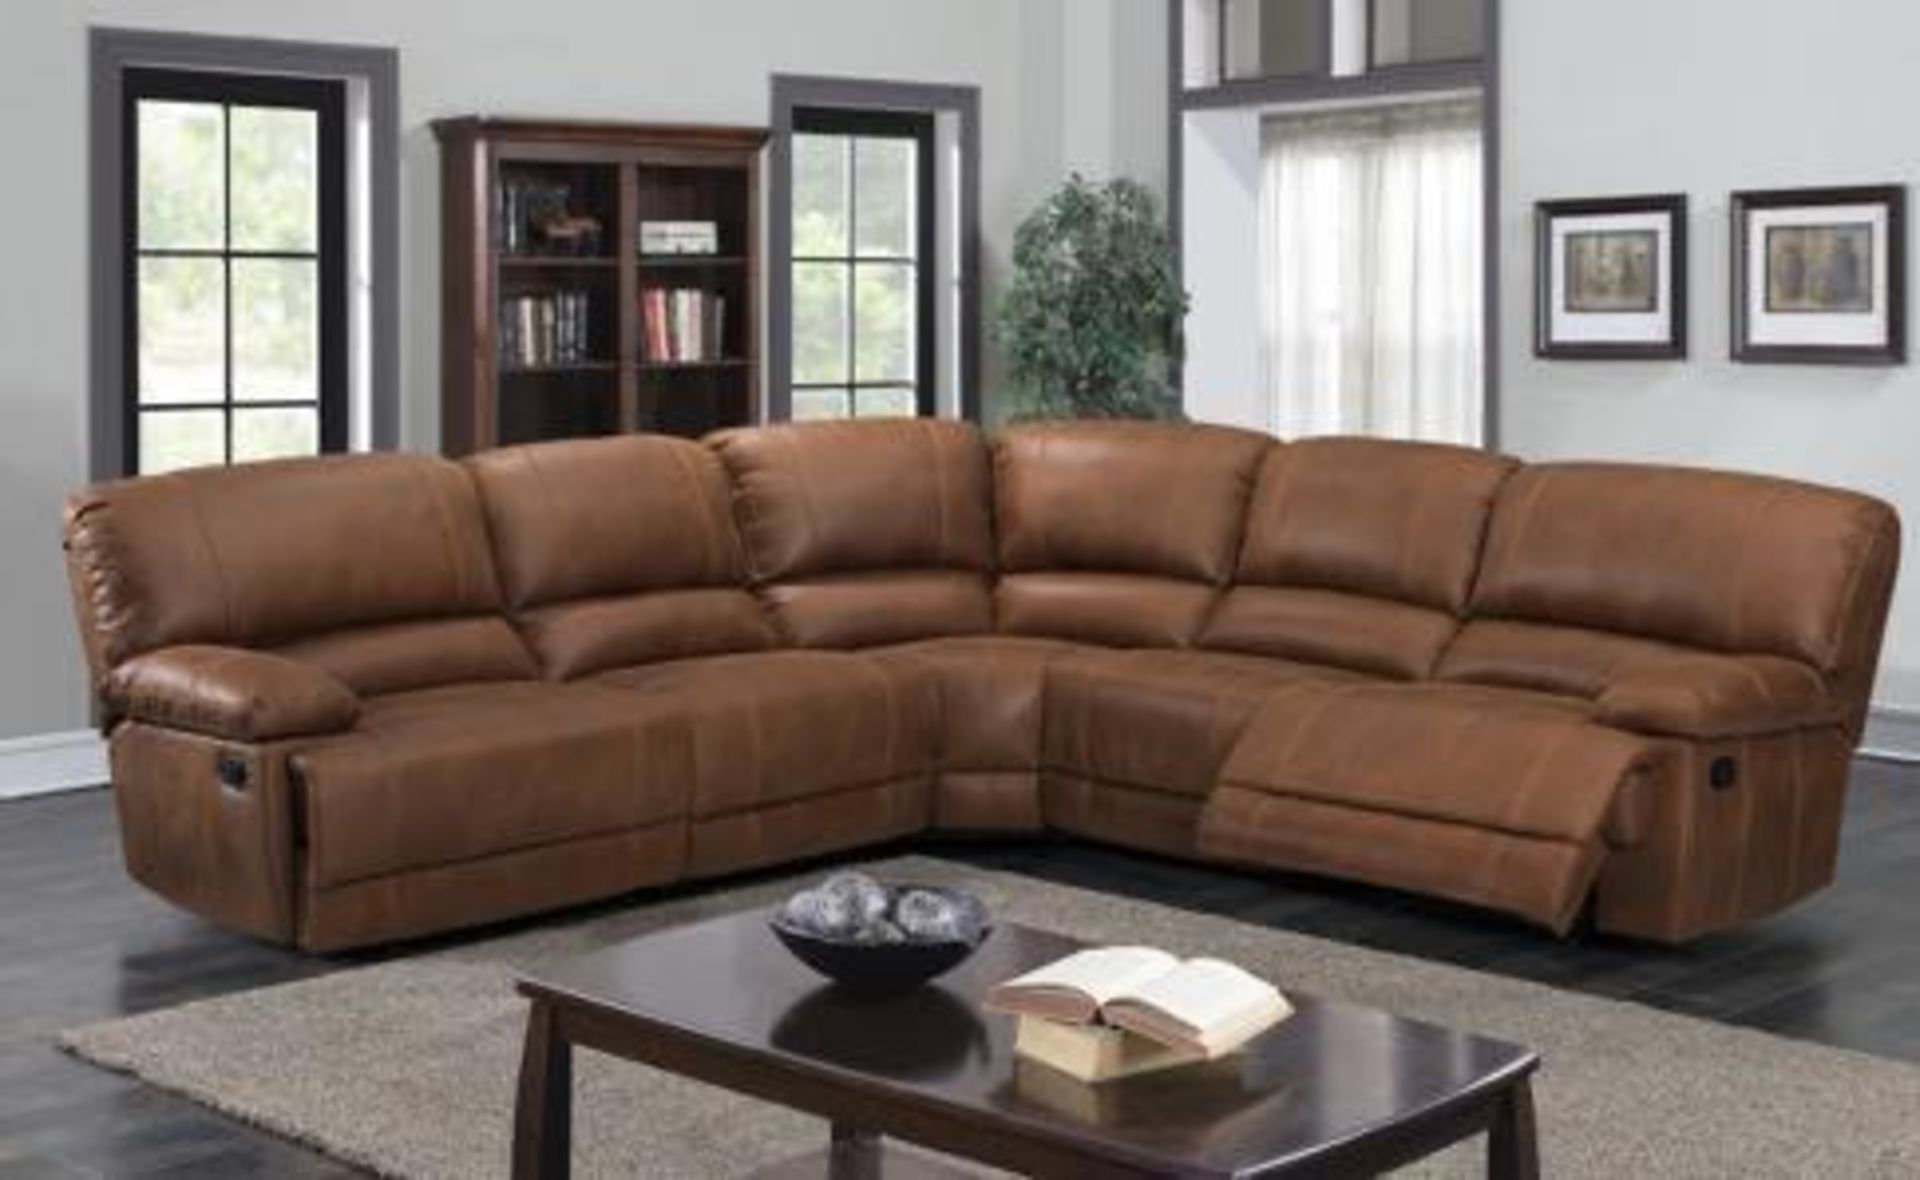 Brand New Boxed Governor Tan Fabric Reclining Corner Sofa - Image 2 of 2